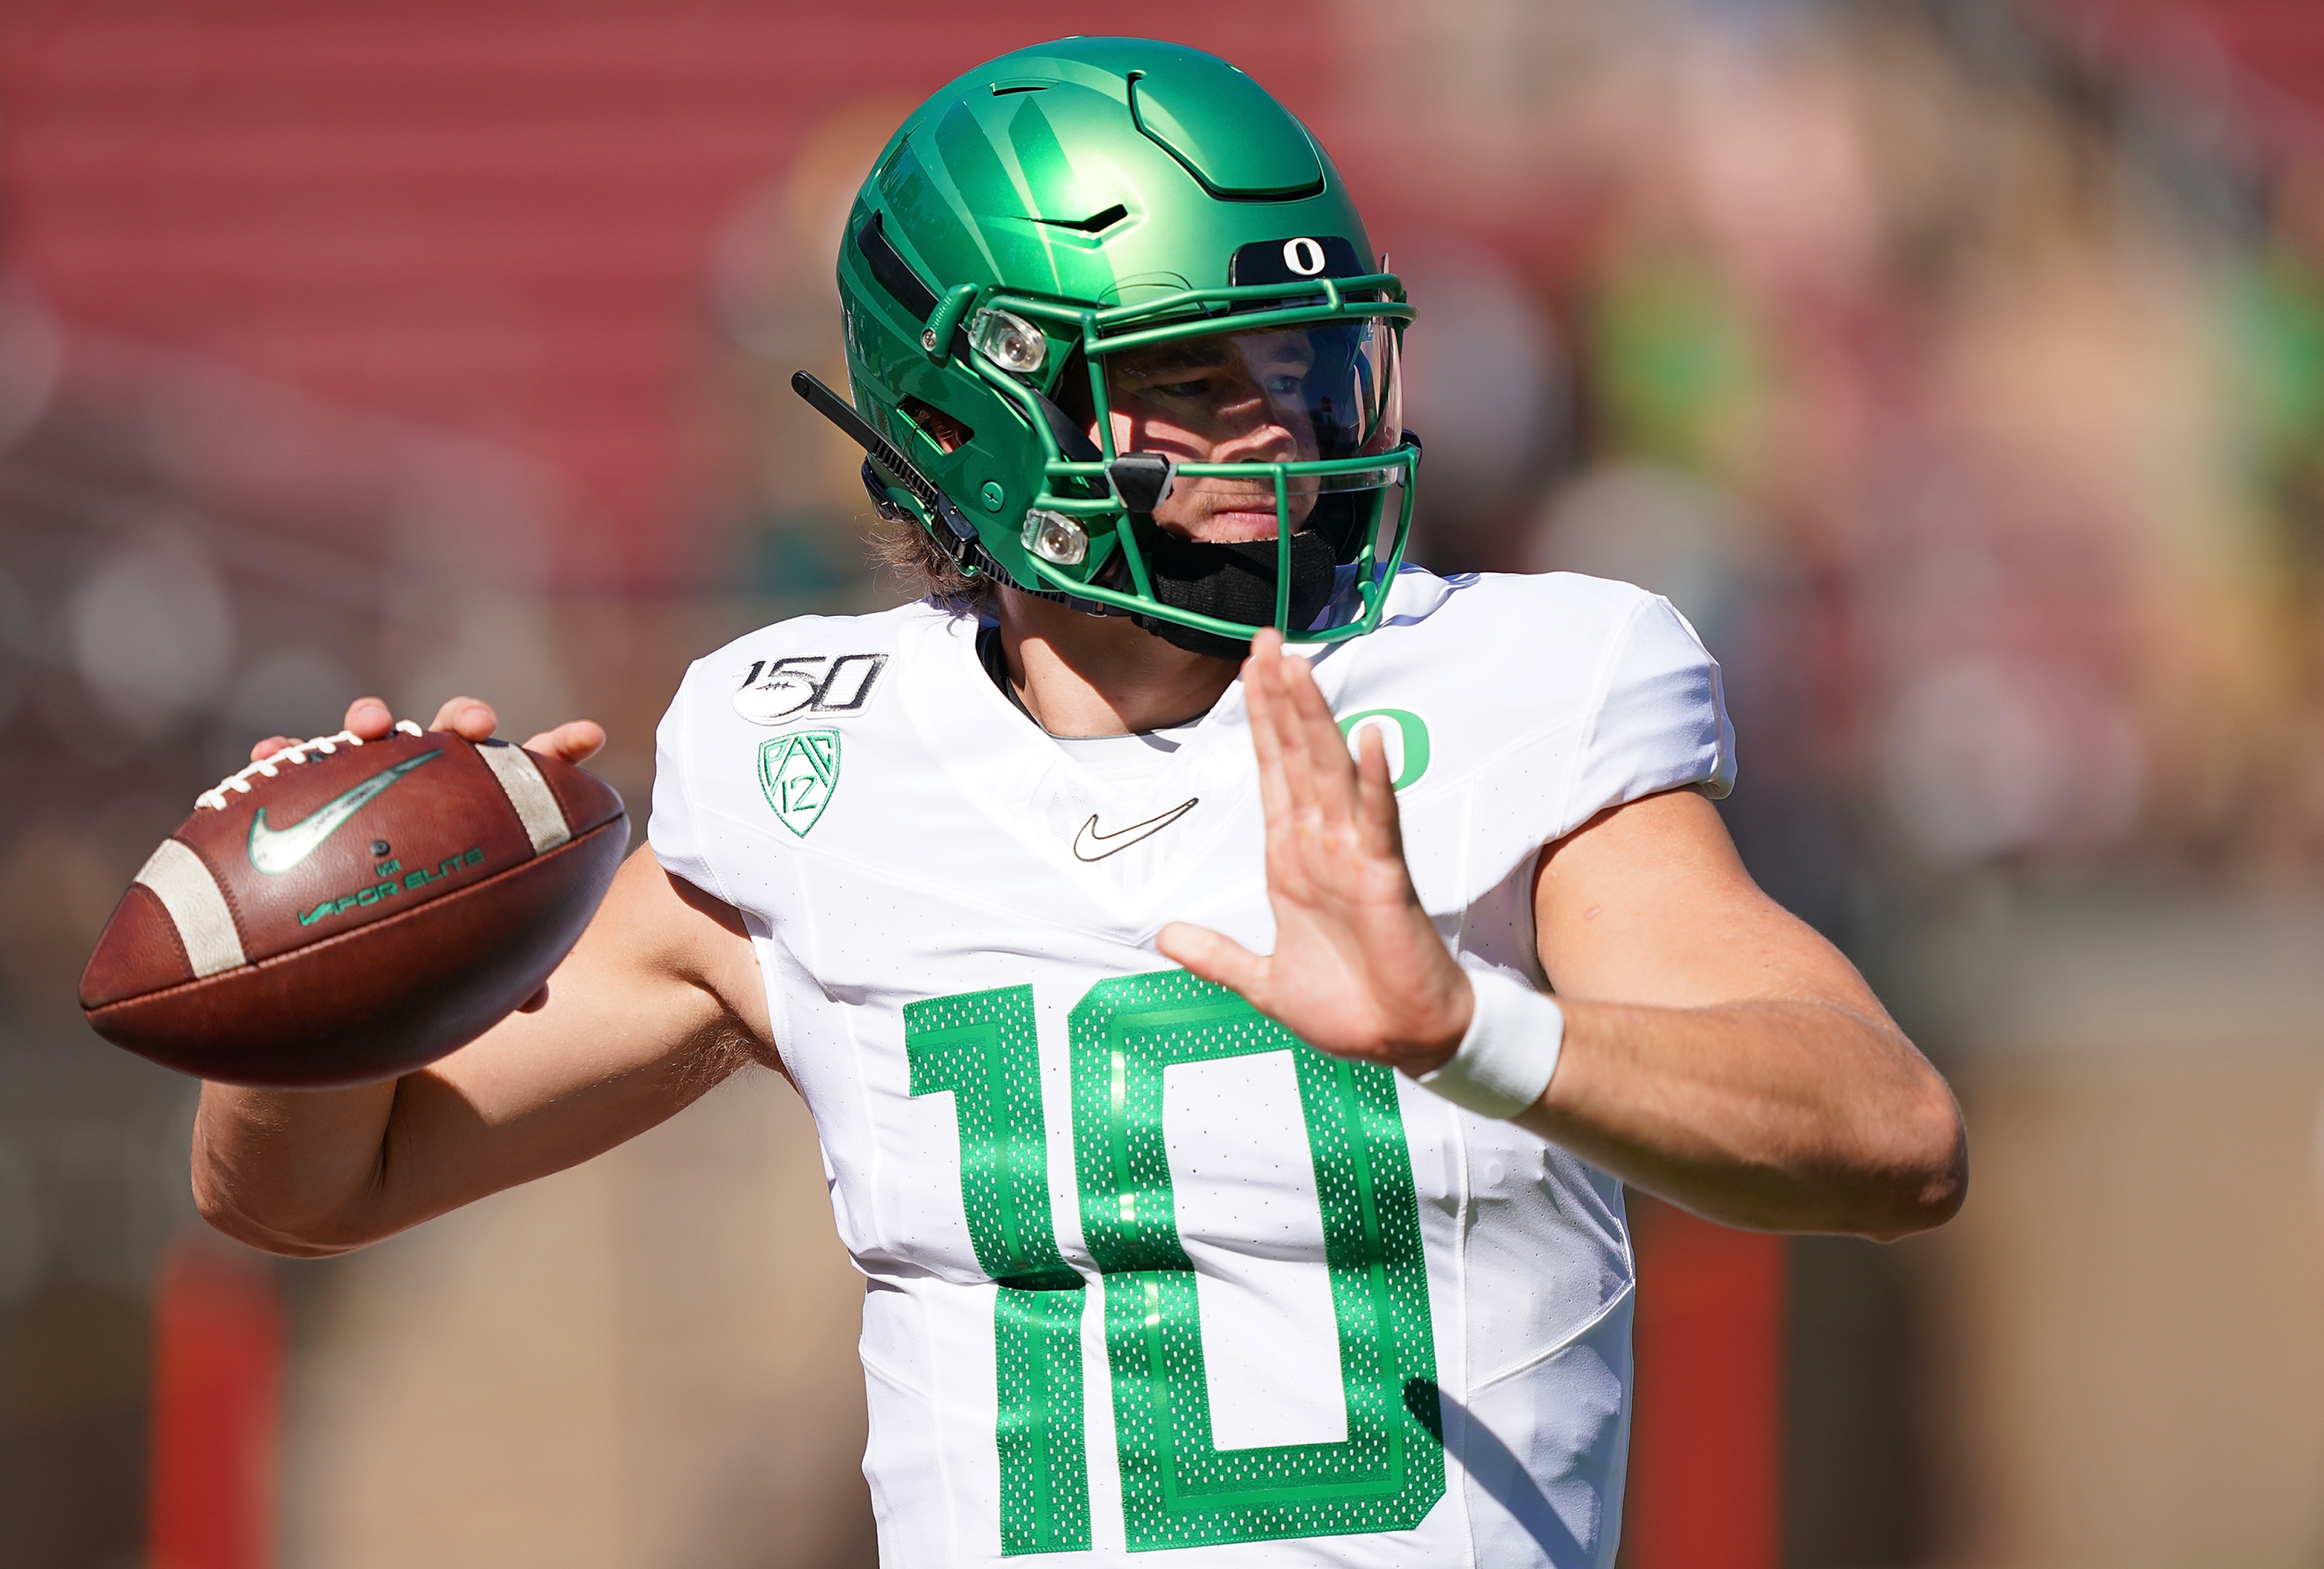 2020 NFL Draft: The game is slowing down for Justin Herbert